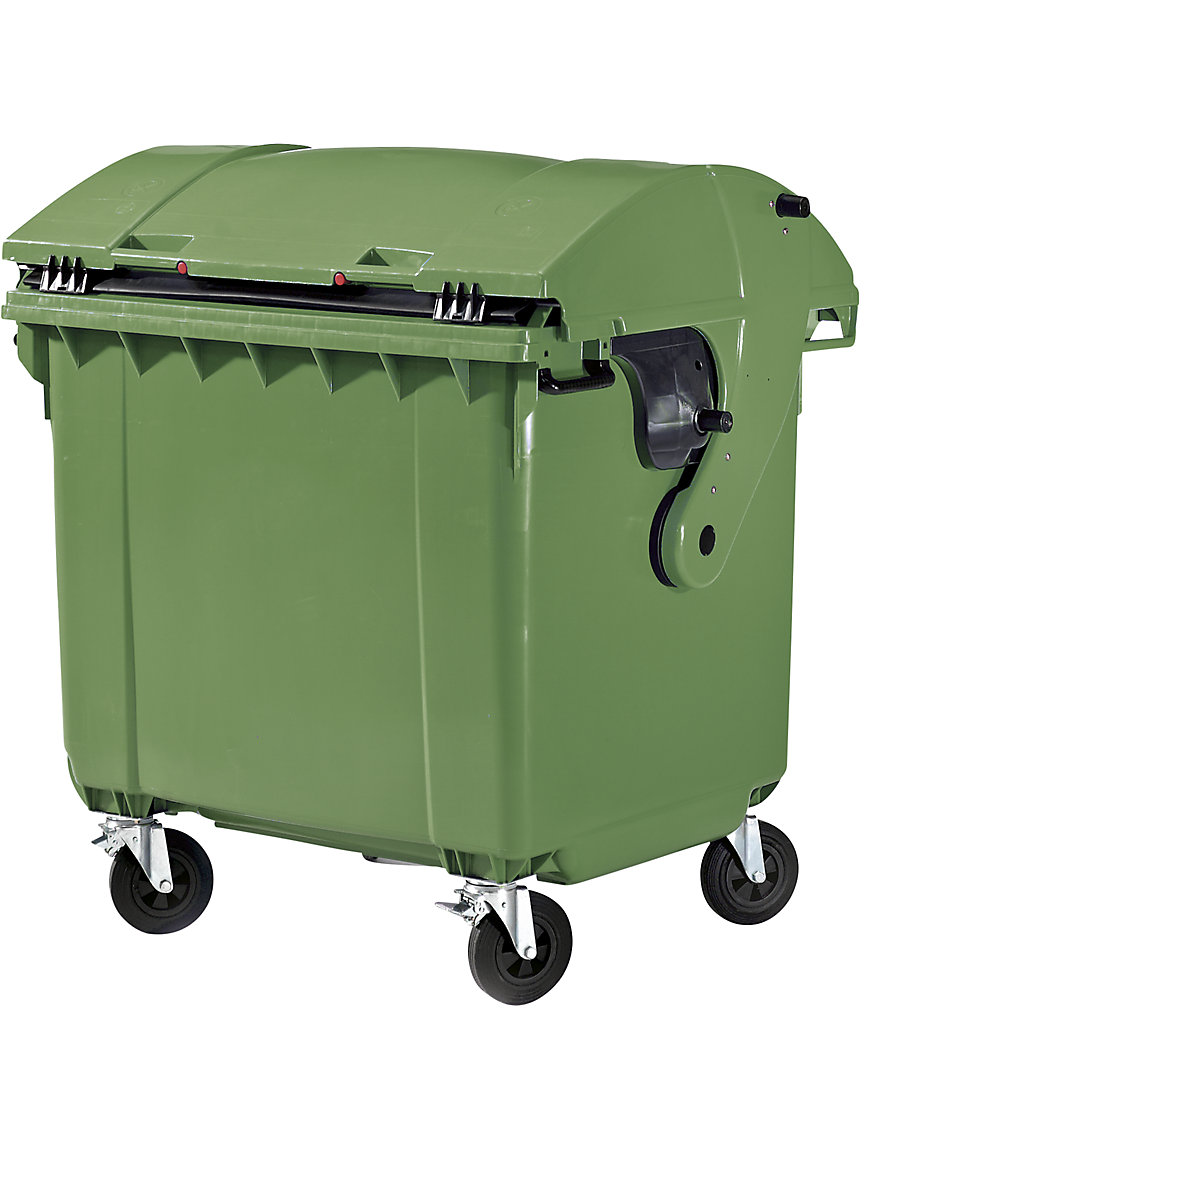 Plastic waste container, DIN EN 840, capacity 1100 l, WxHxD 1360 x 1465 x 1100 mm, sliding lid, child lock, green, from 5+ items-4